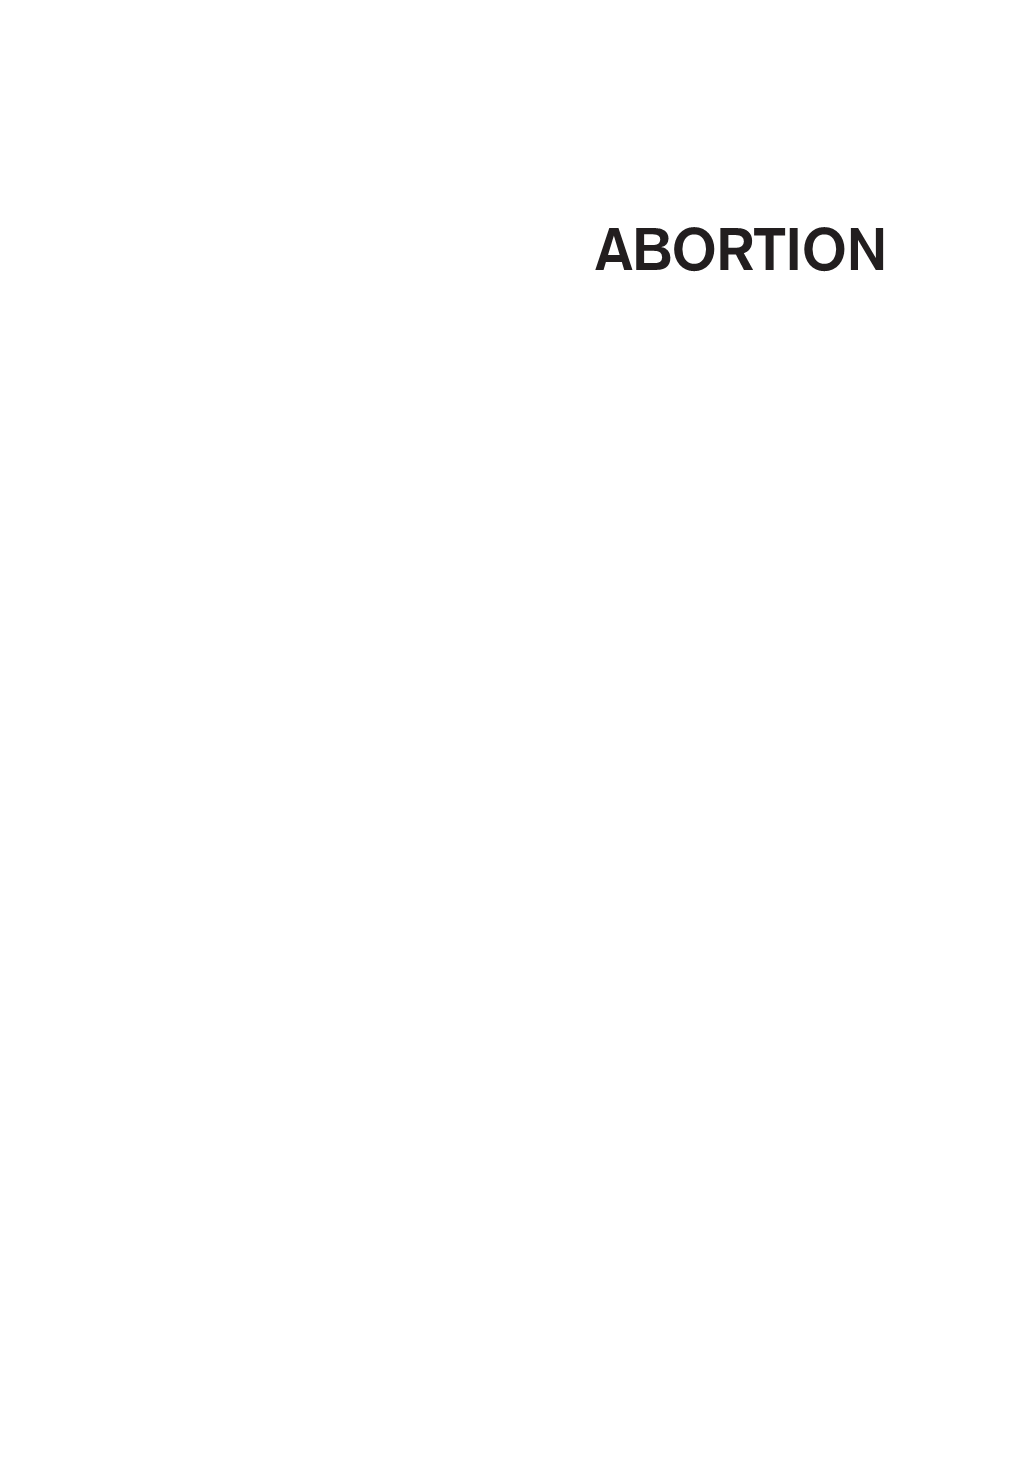 The Wrong of Abortion